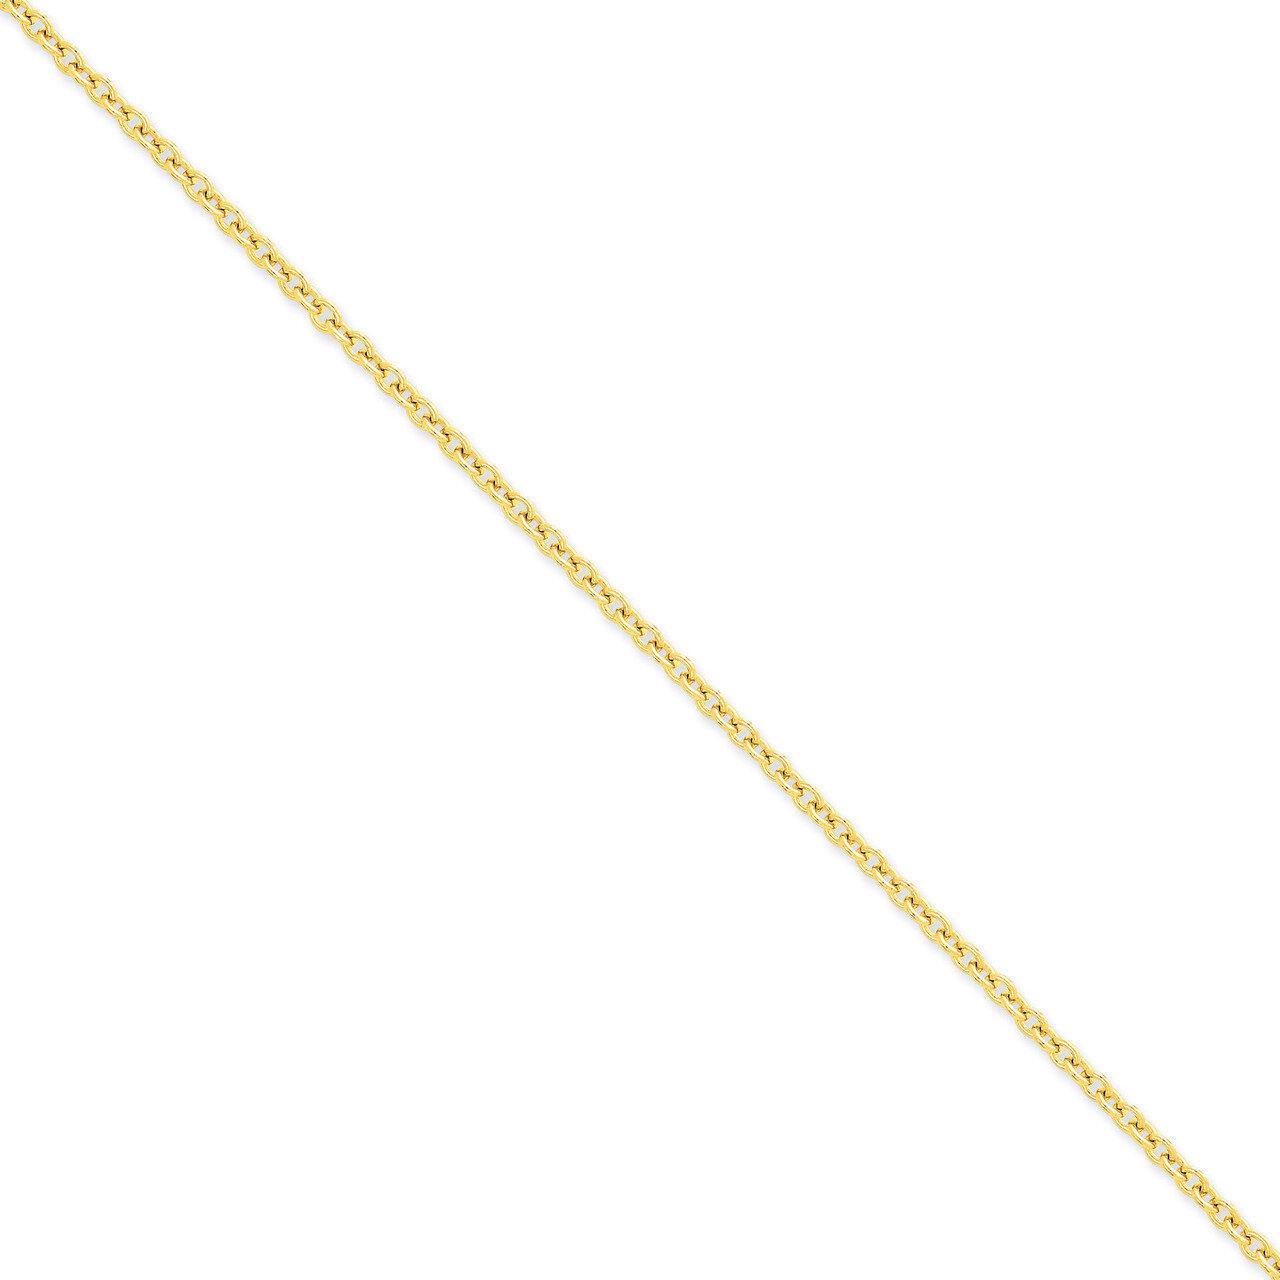 3.2mm Cable Chain 18 Inch 14k Gold PEN218-18